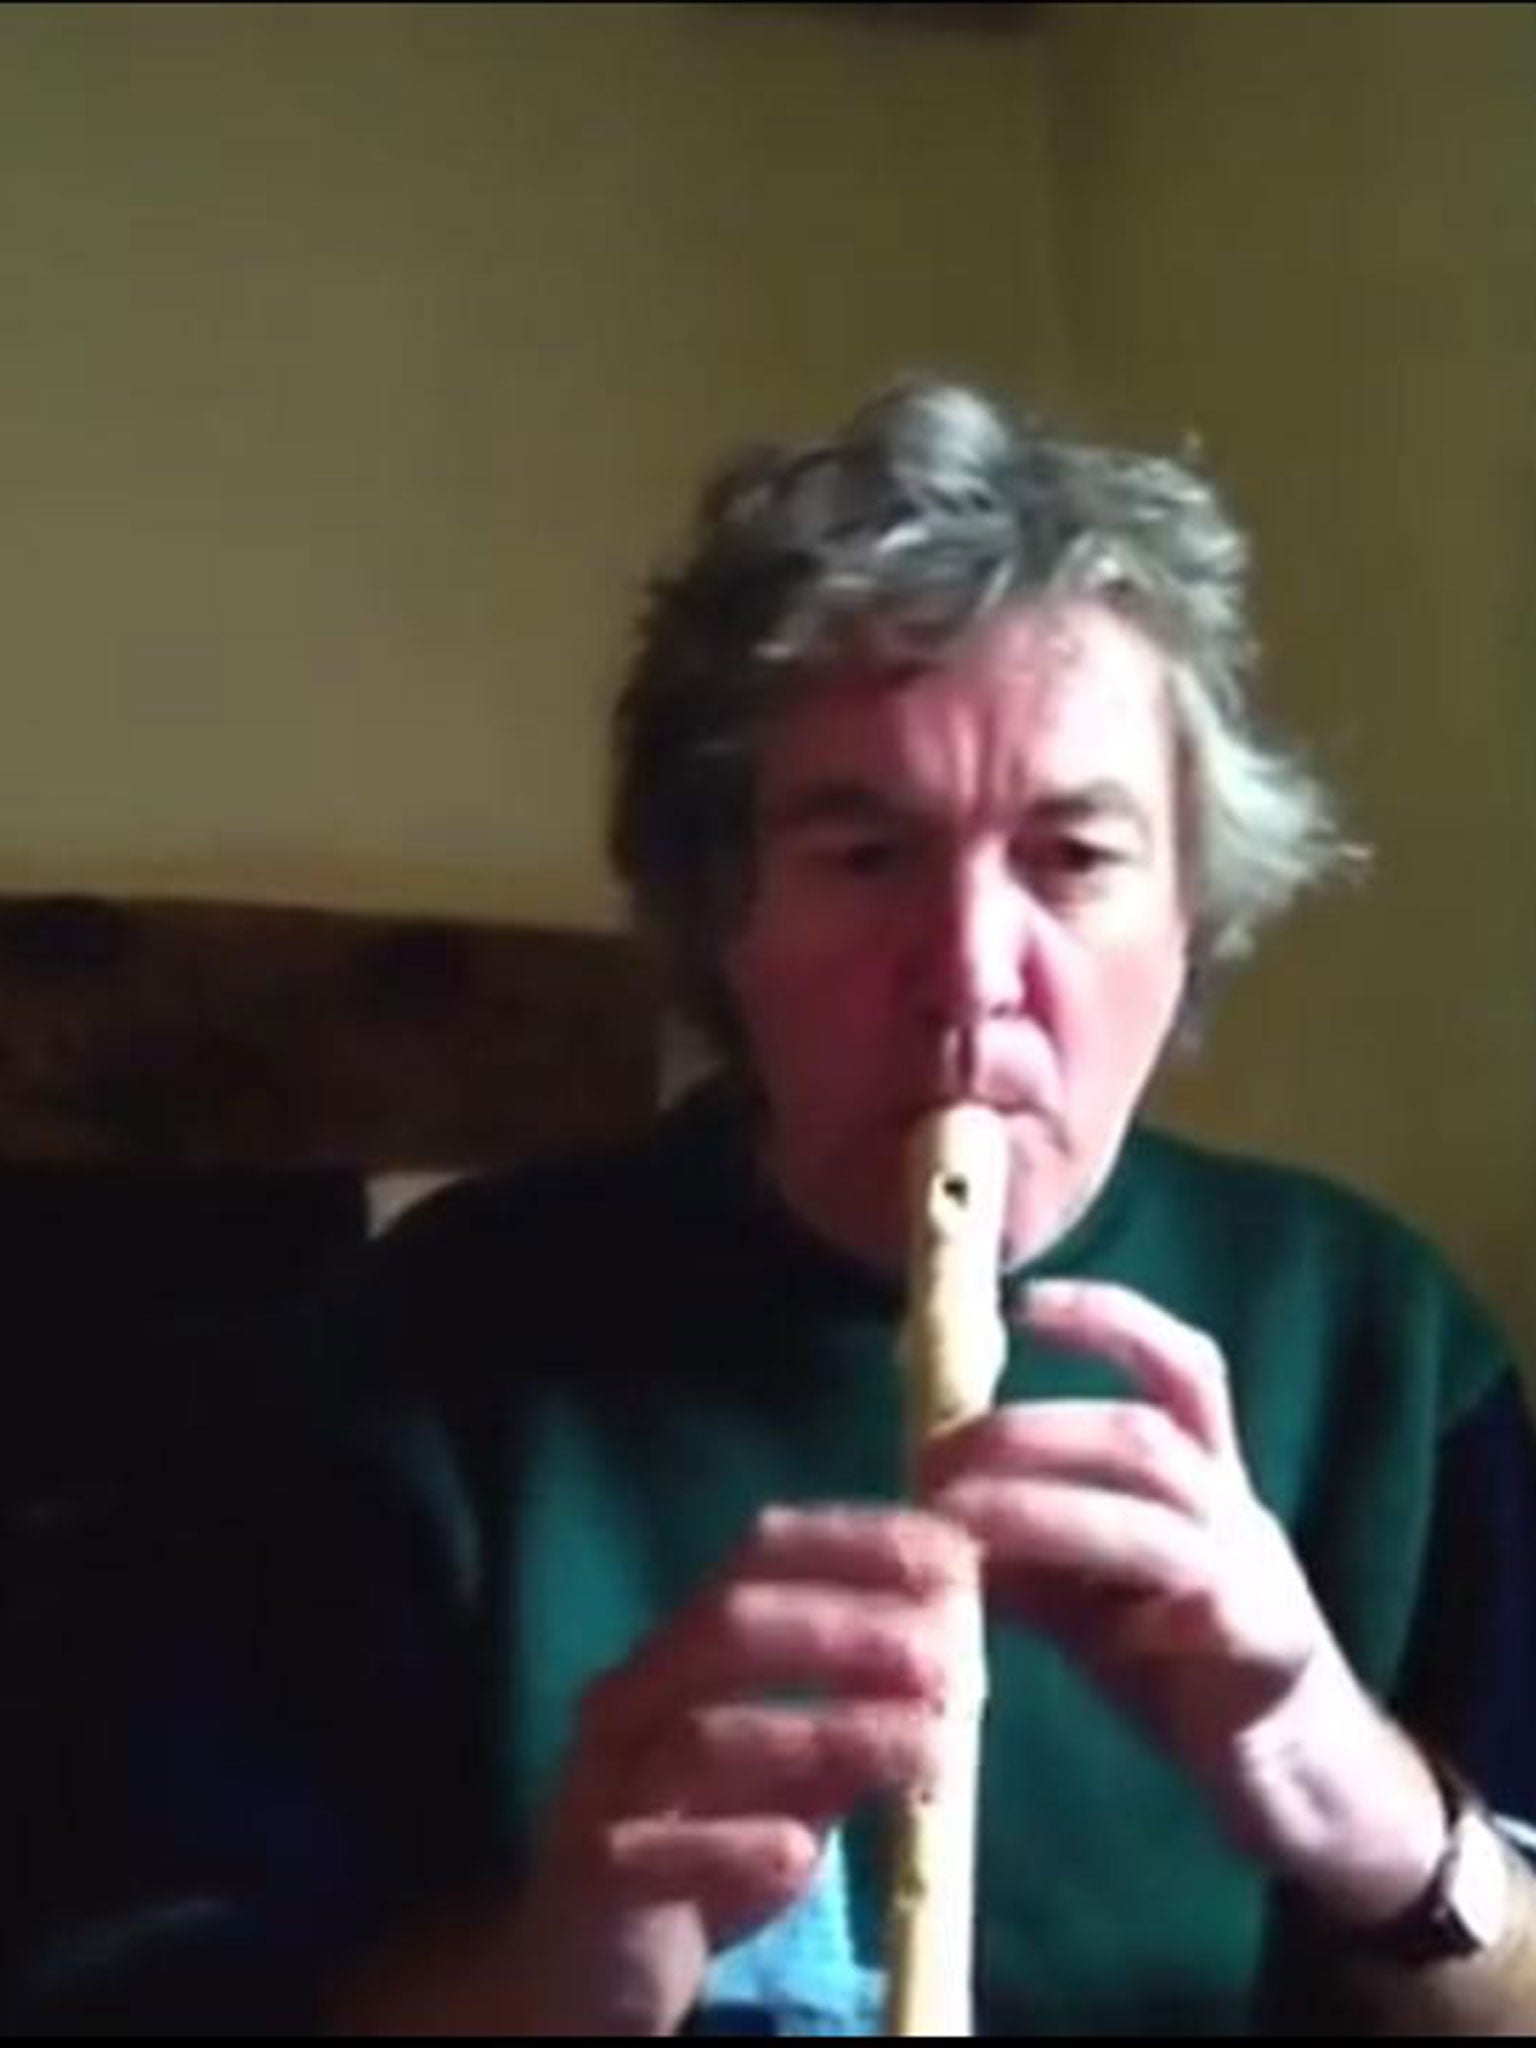 James May seems to be struggling with the void left by Top Gear